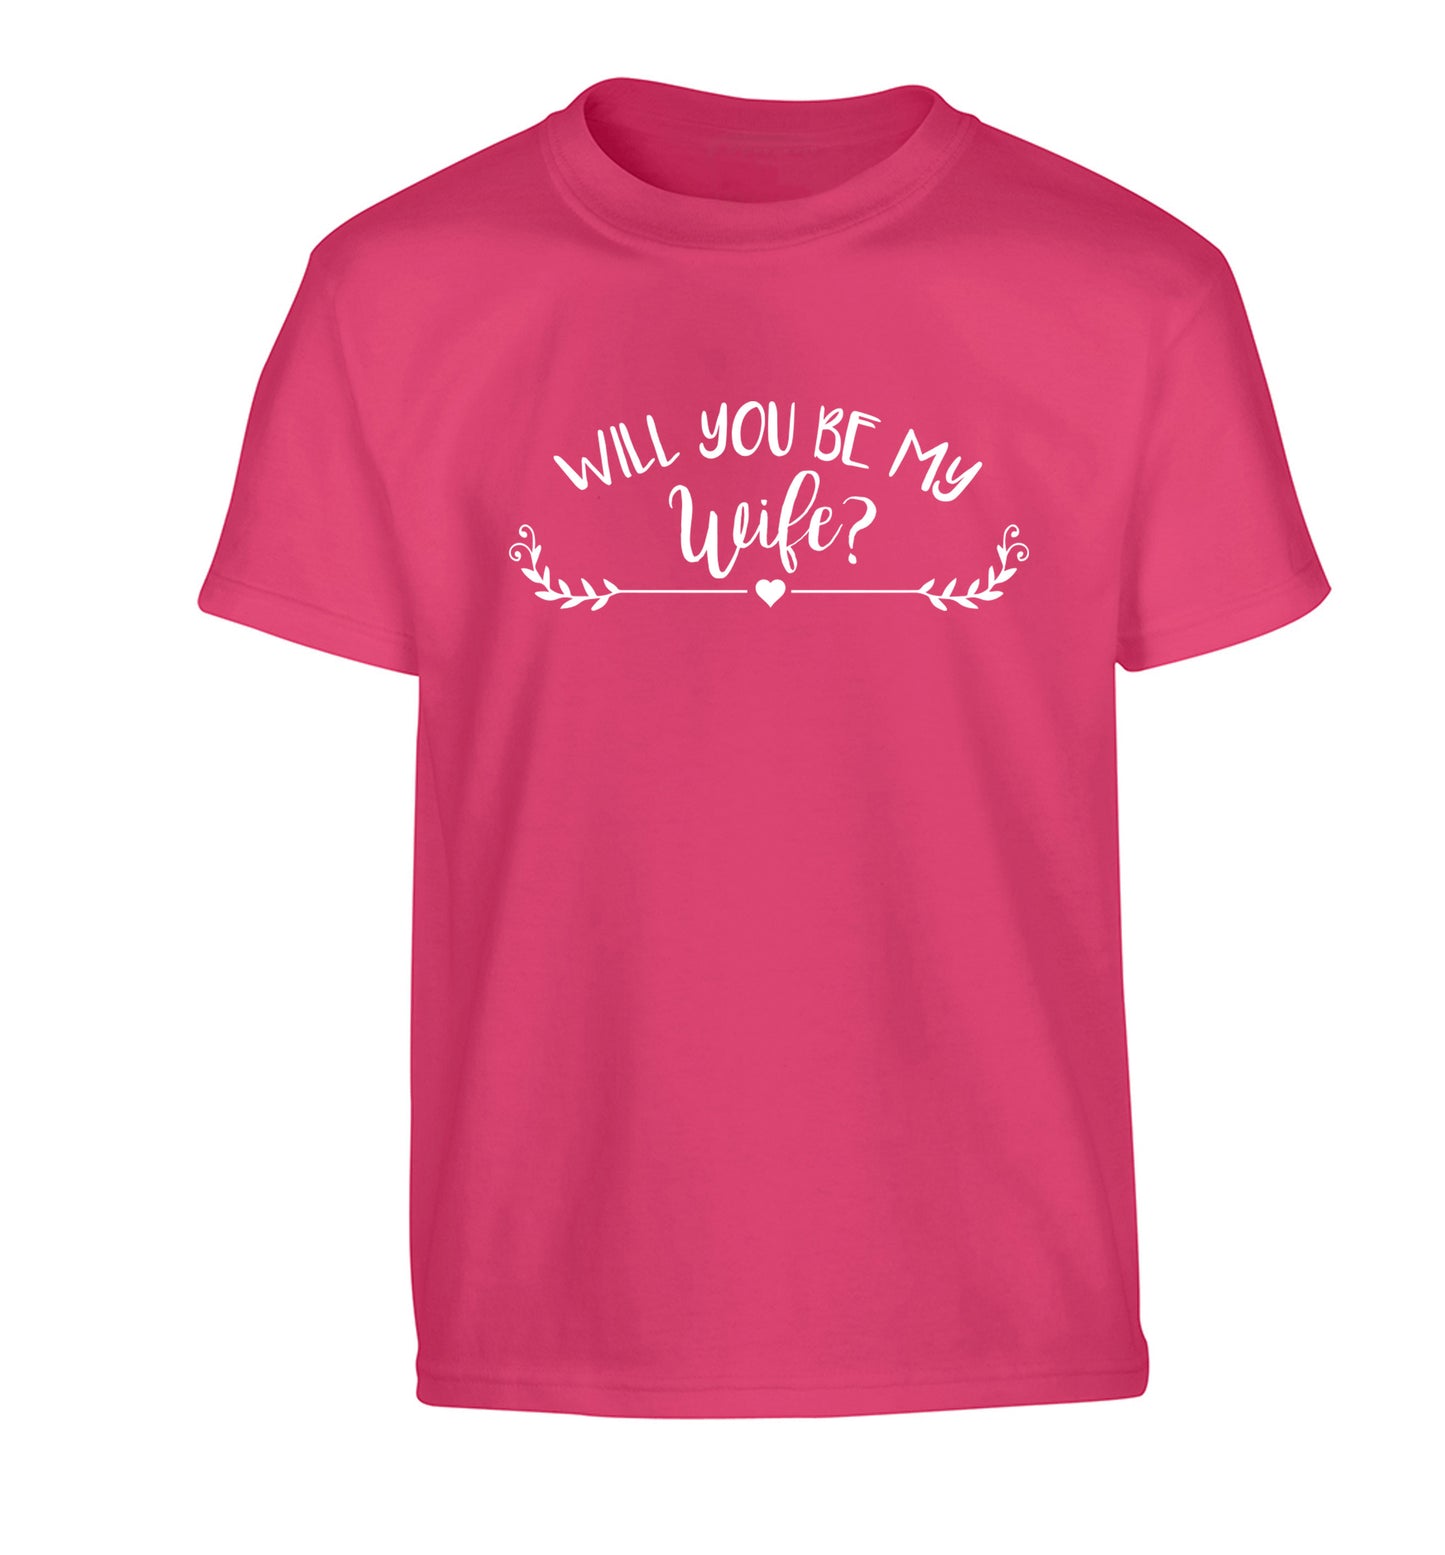 Will you be my wife? Children's pink Tshirt 12-14 Years